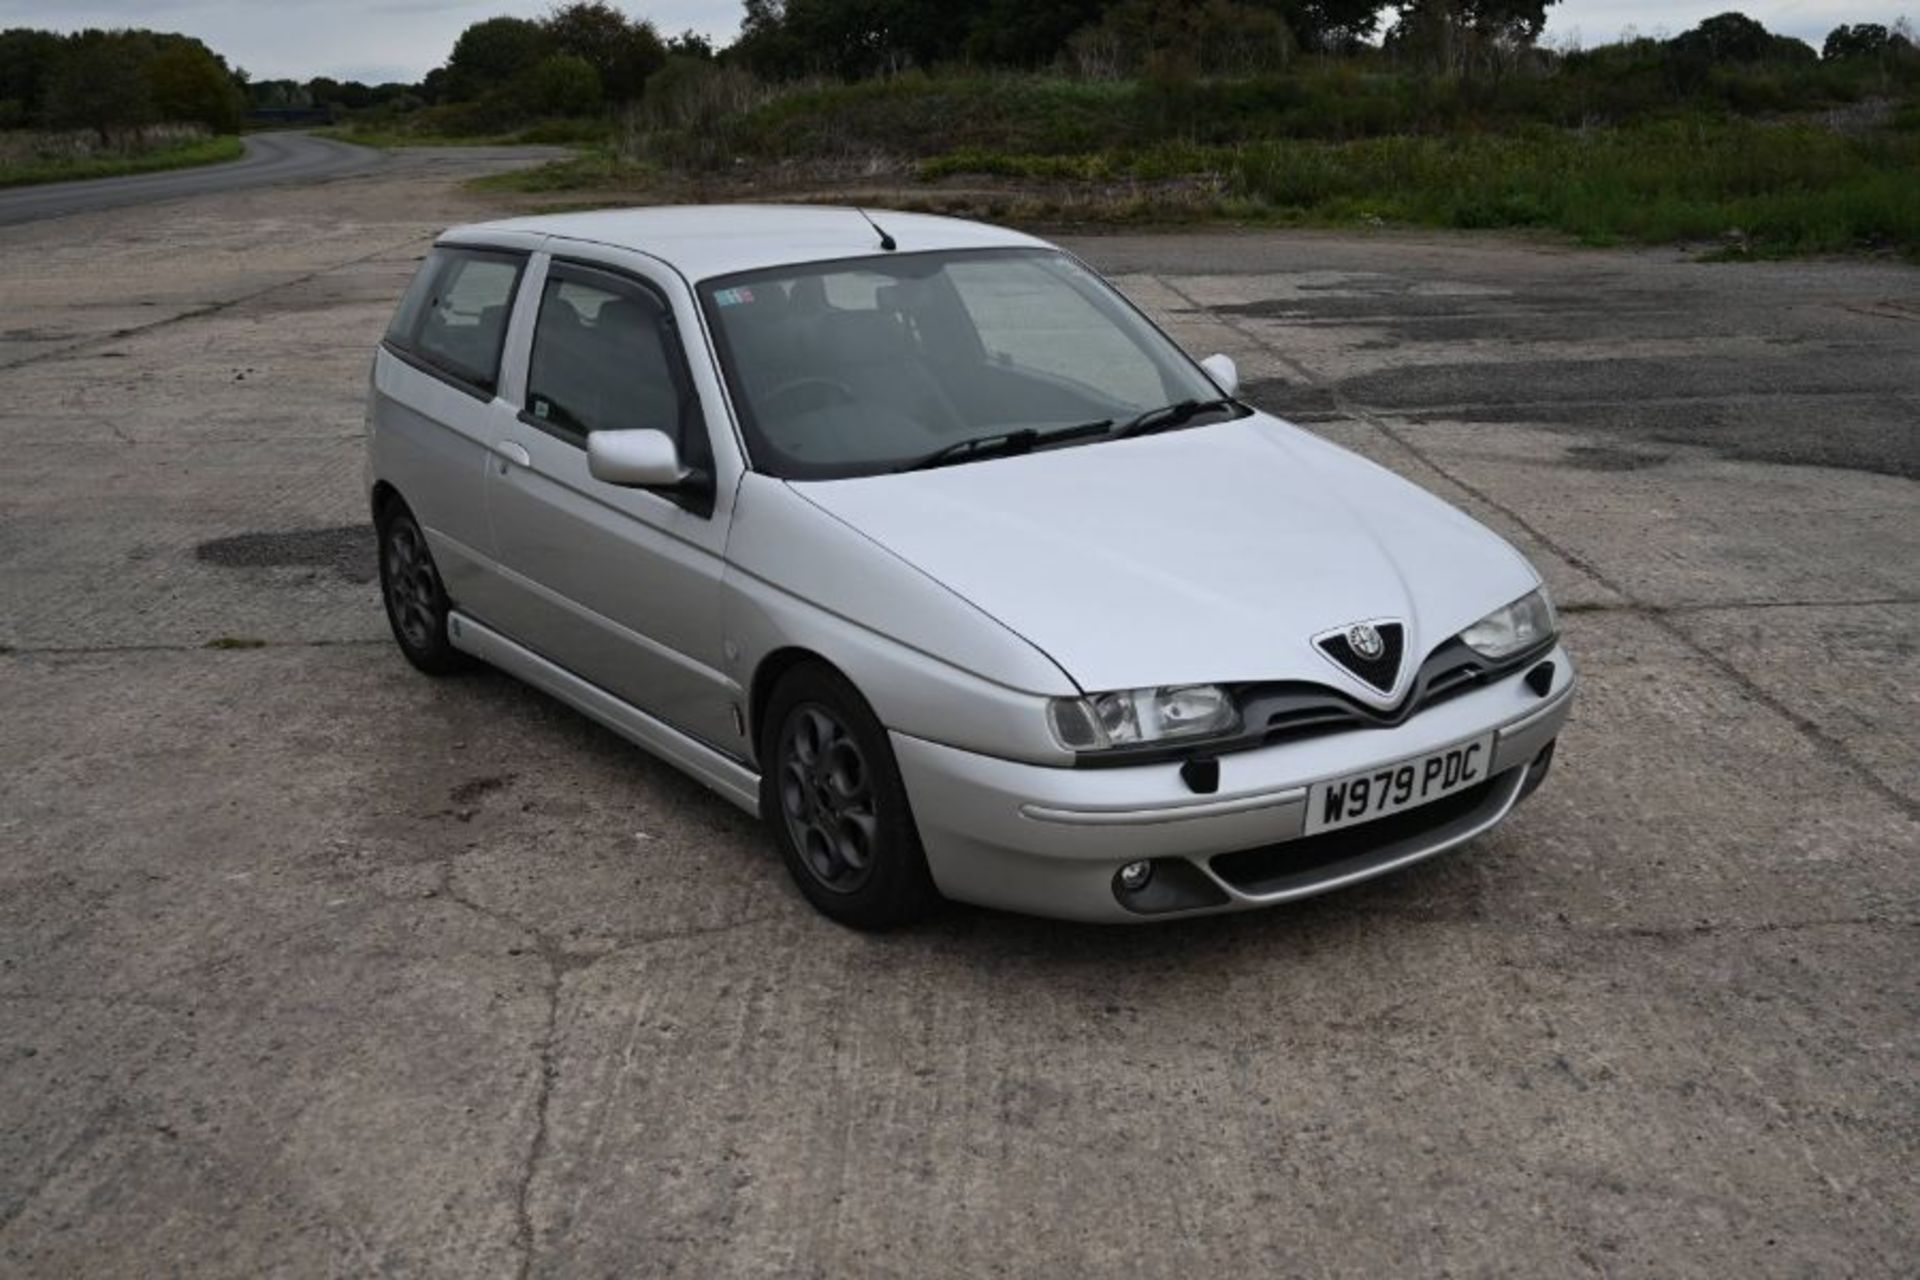 2000 Alfa Romeo 145 Clover Leaf. One of the very last UK registered examples of Alfa’s 145 - Image 7 of 22